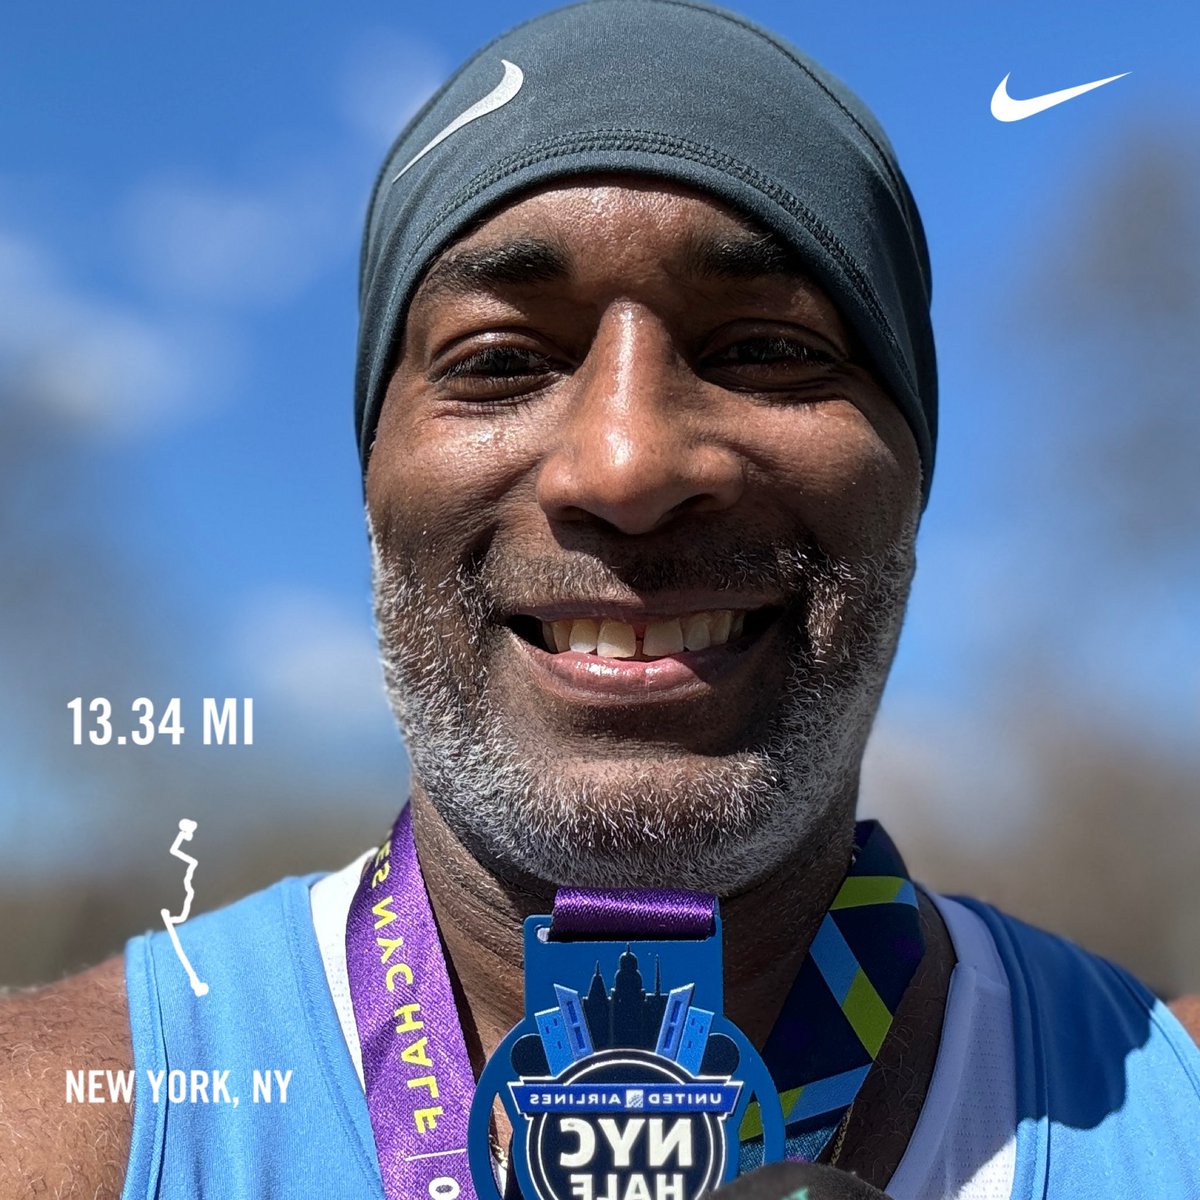 If it was easy, everyone would do it. #UnitedNYCHalf